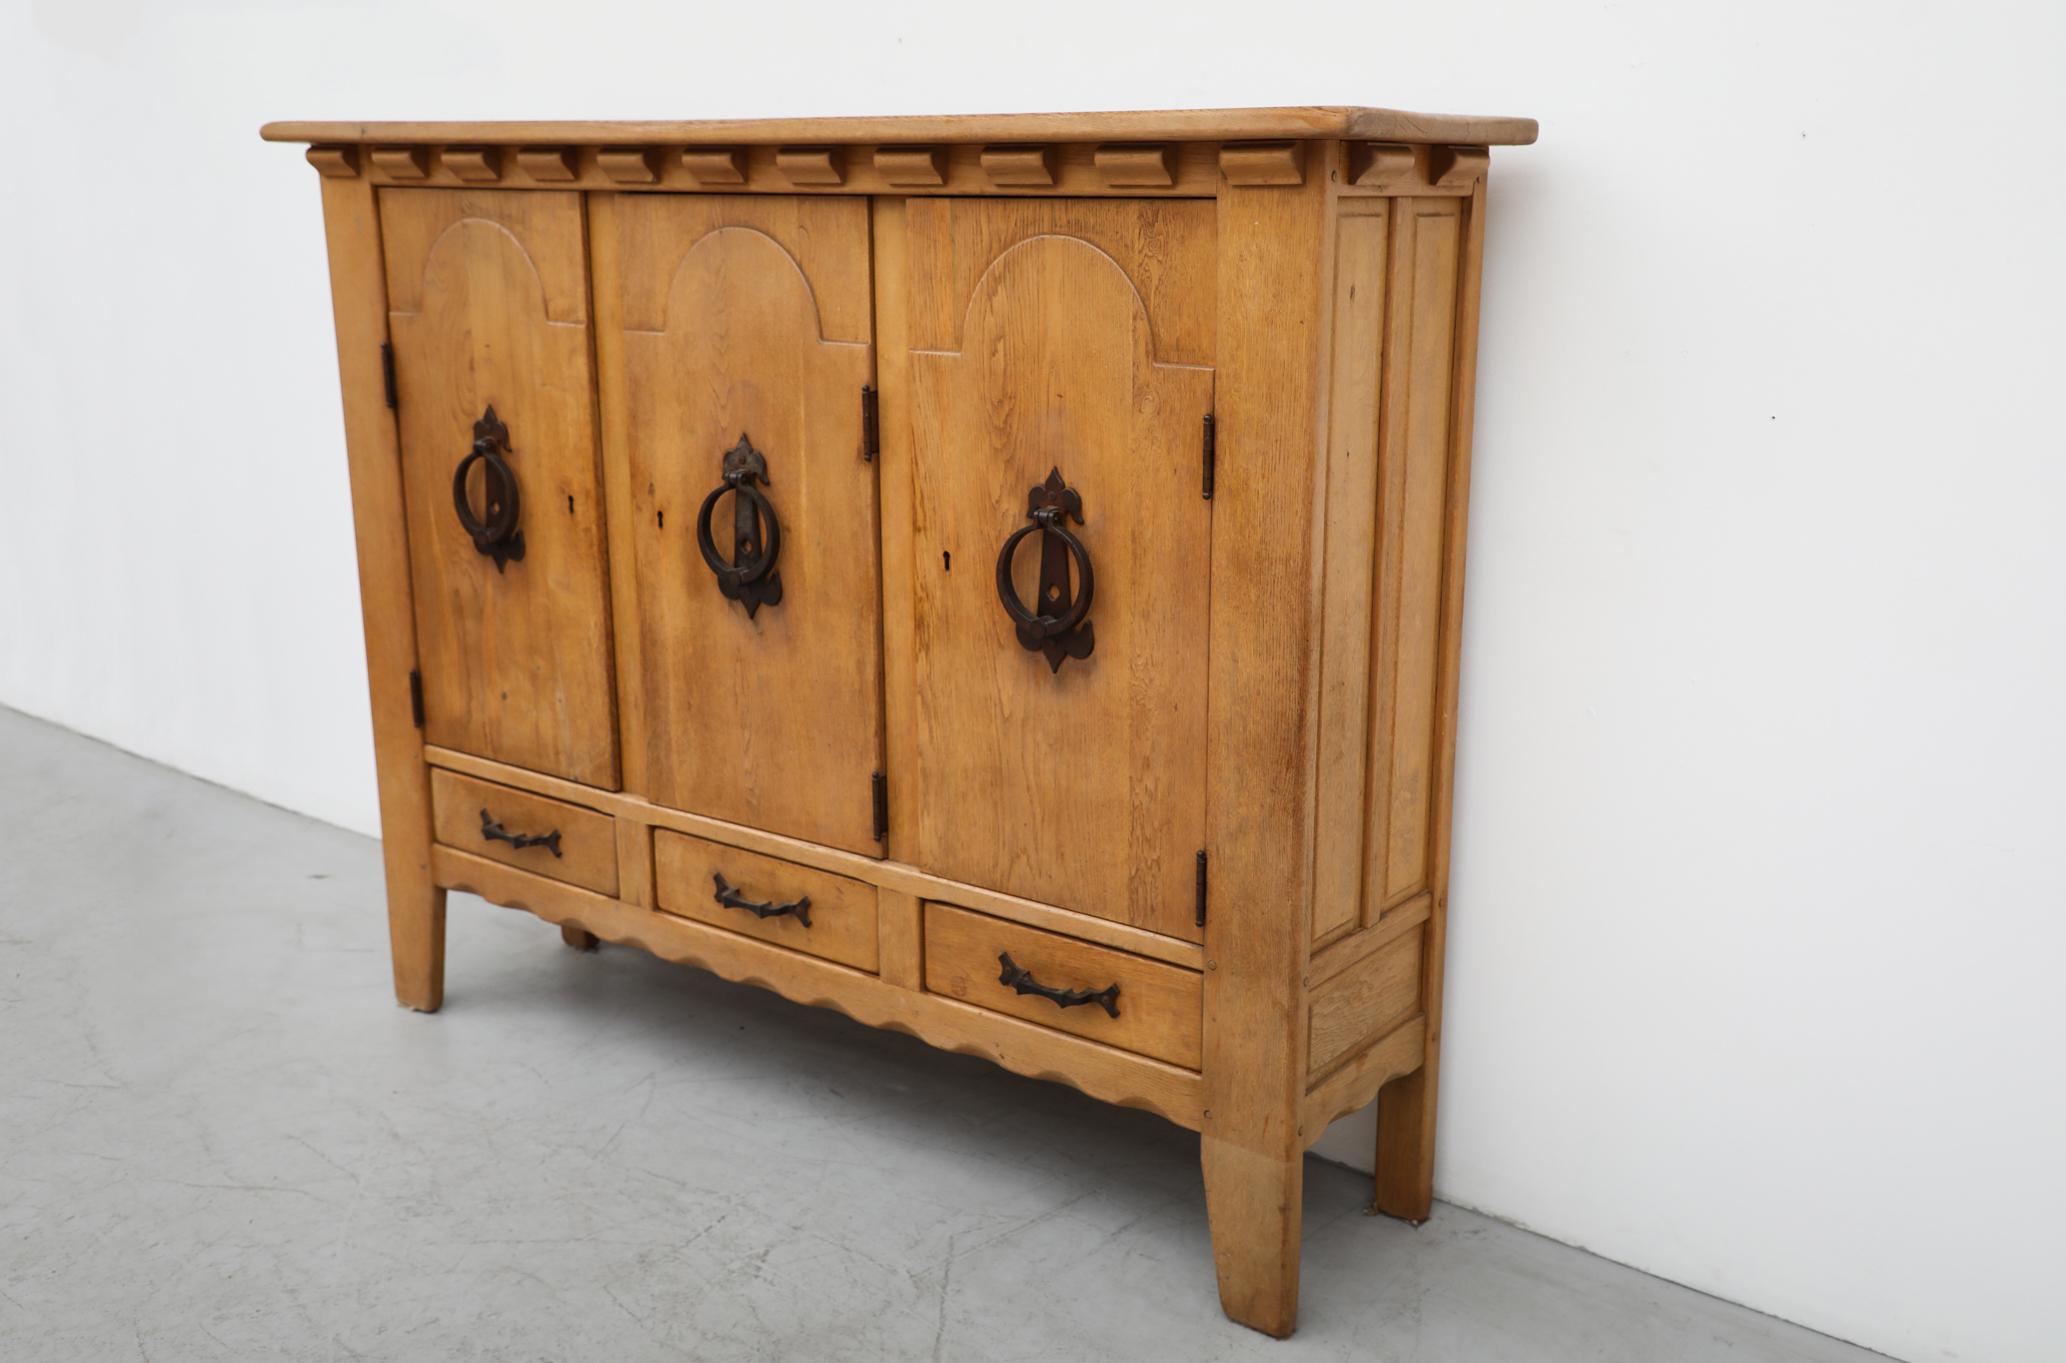 European Guillerme et Chambron Inspired Brutalist Oak and Iron Sideboard